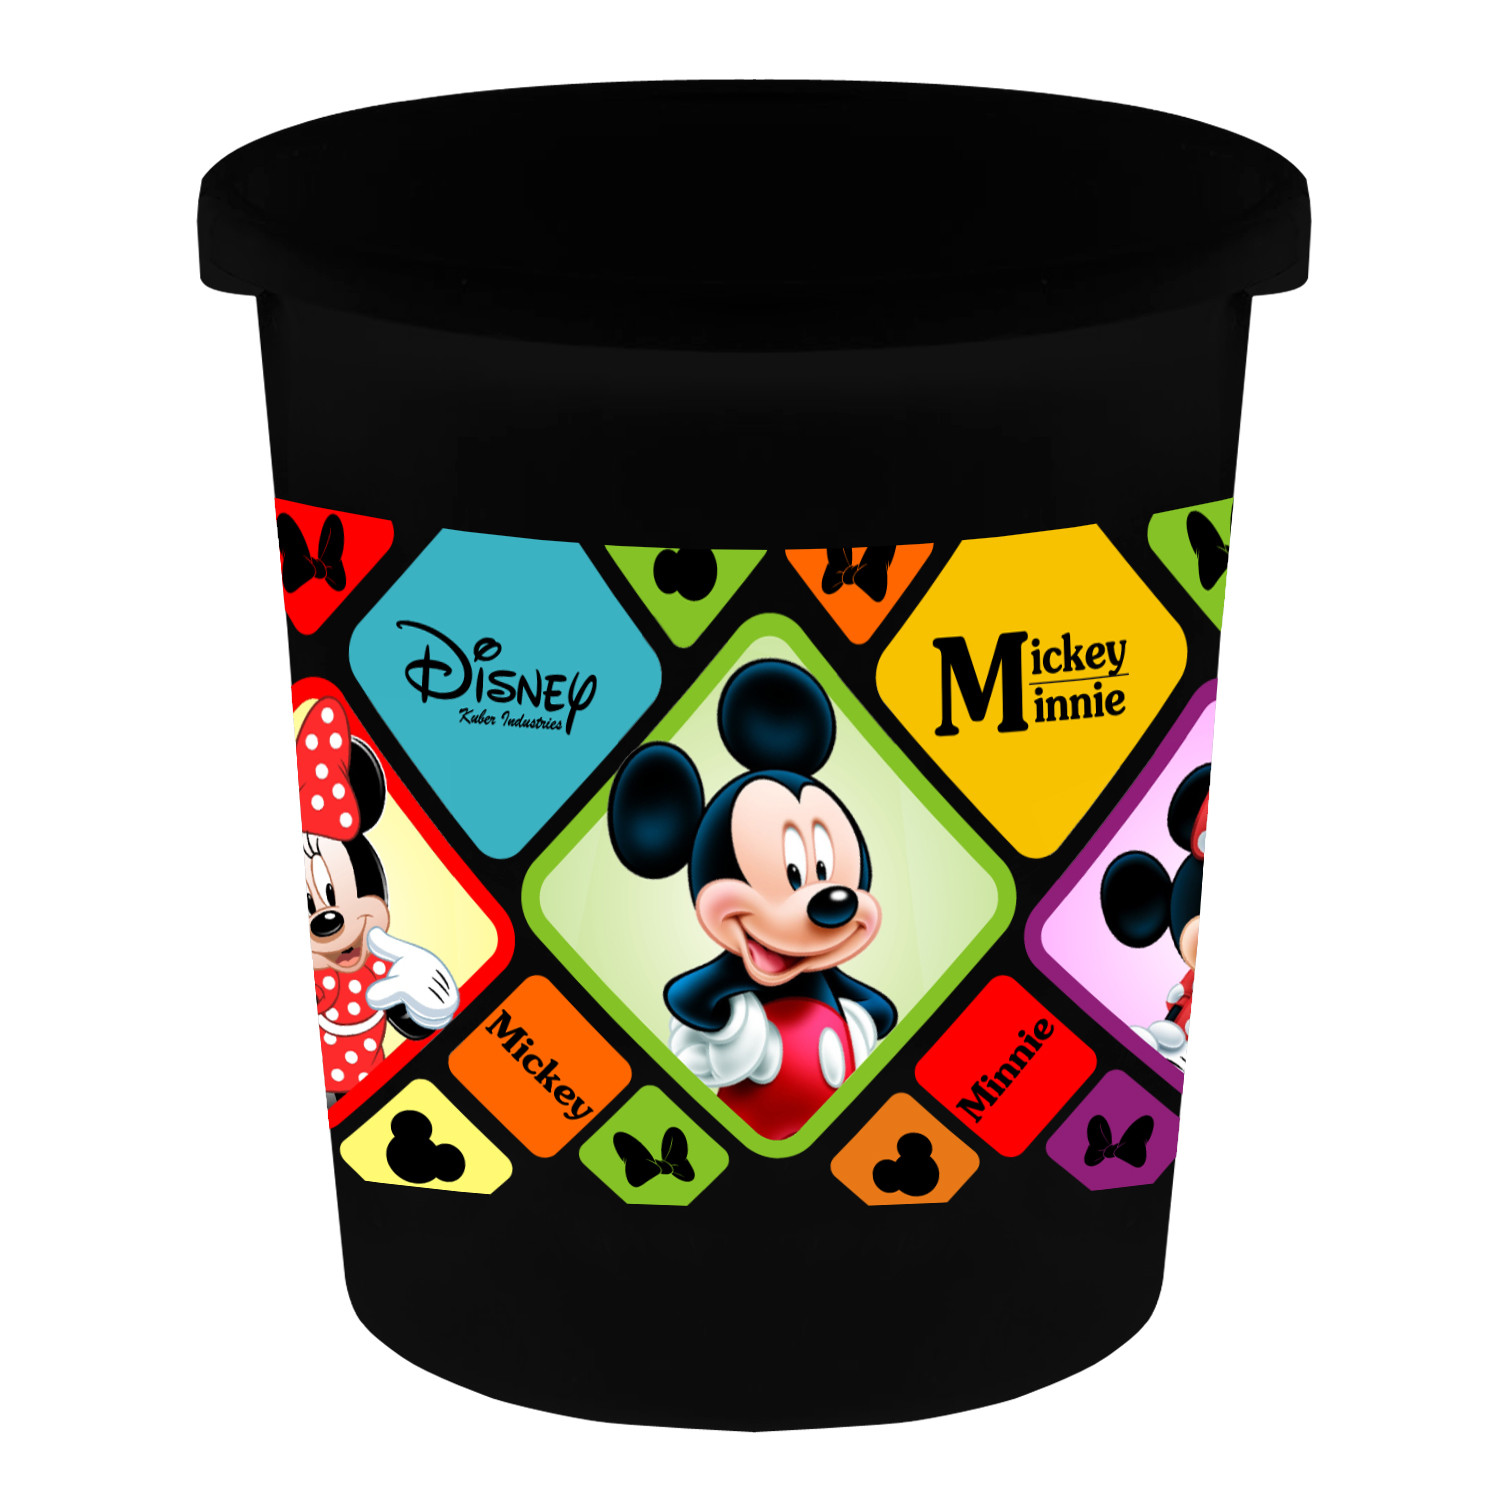 Kuber Industries Disney Mickey Minnie Print Plastic 2 Pieces Garbage Waste Dustbin/Recycling Bin for Home, Office, Factory, 5 Liters (Black & White) -HS_35_KUBMART17803